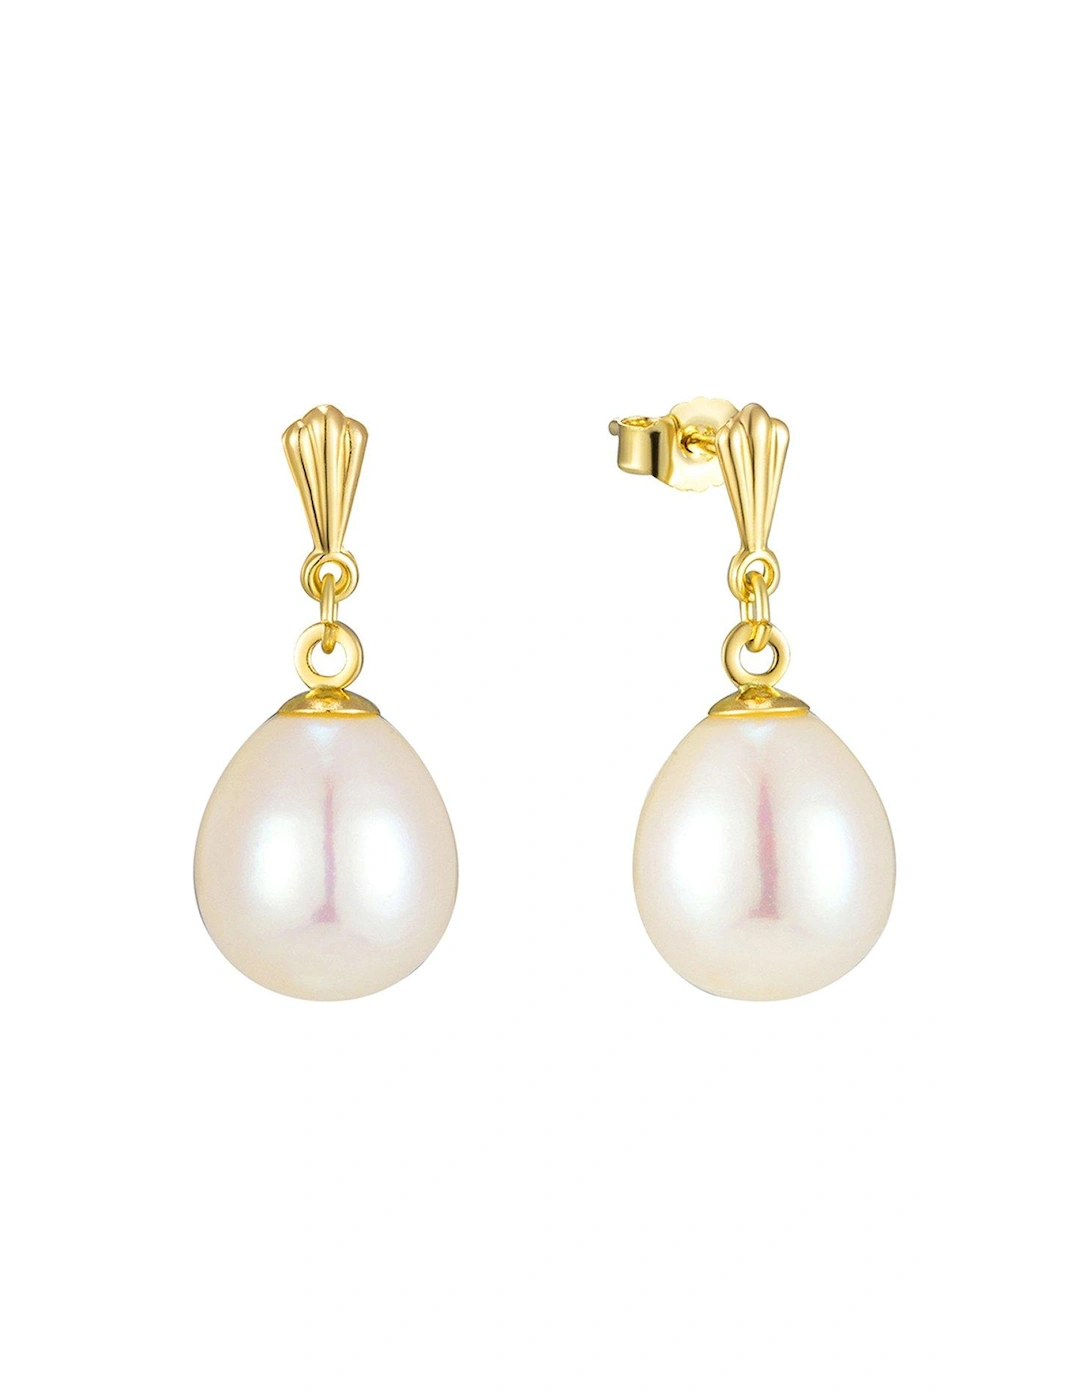 9ct Gold large Freshwater Pearl Oval Drop Earrings, 2 of 1